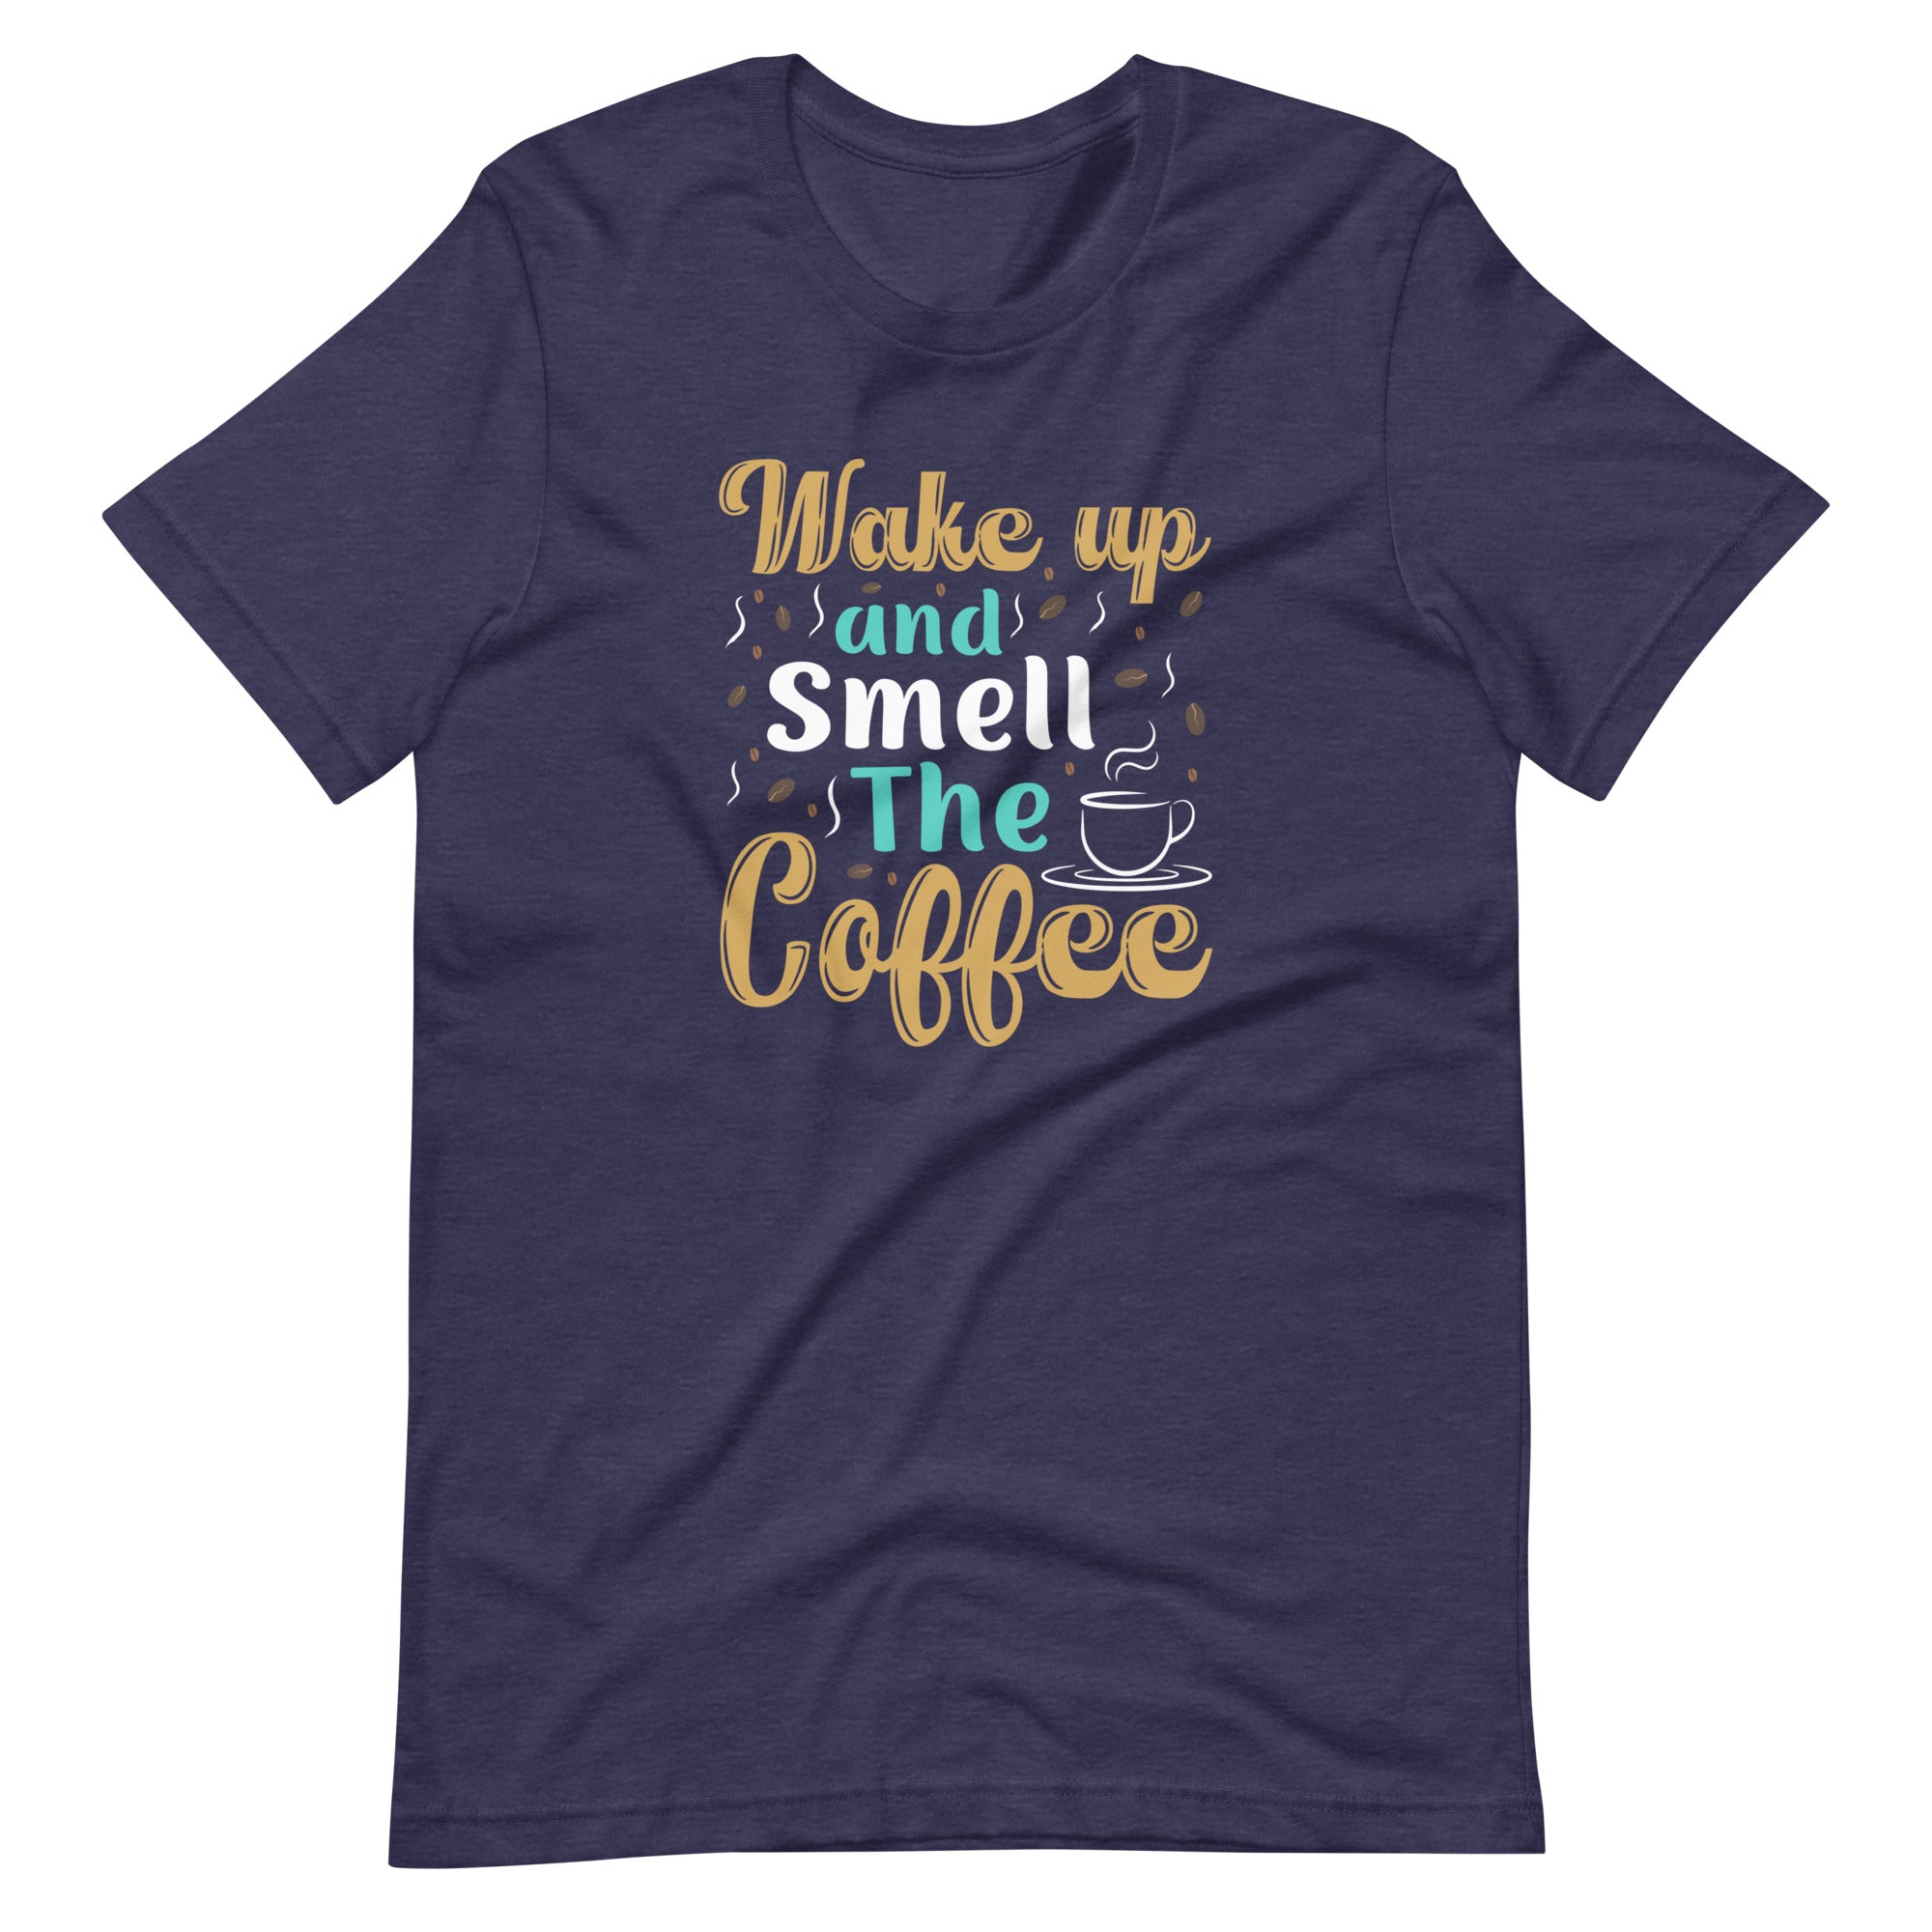 Smell the Coffee Unisex t-shirt